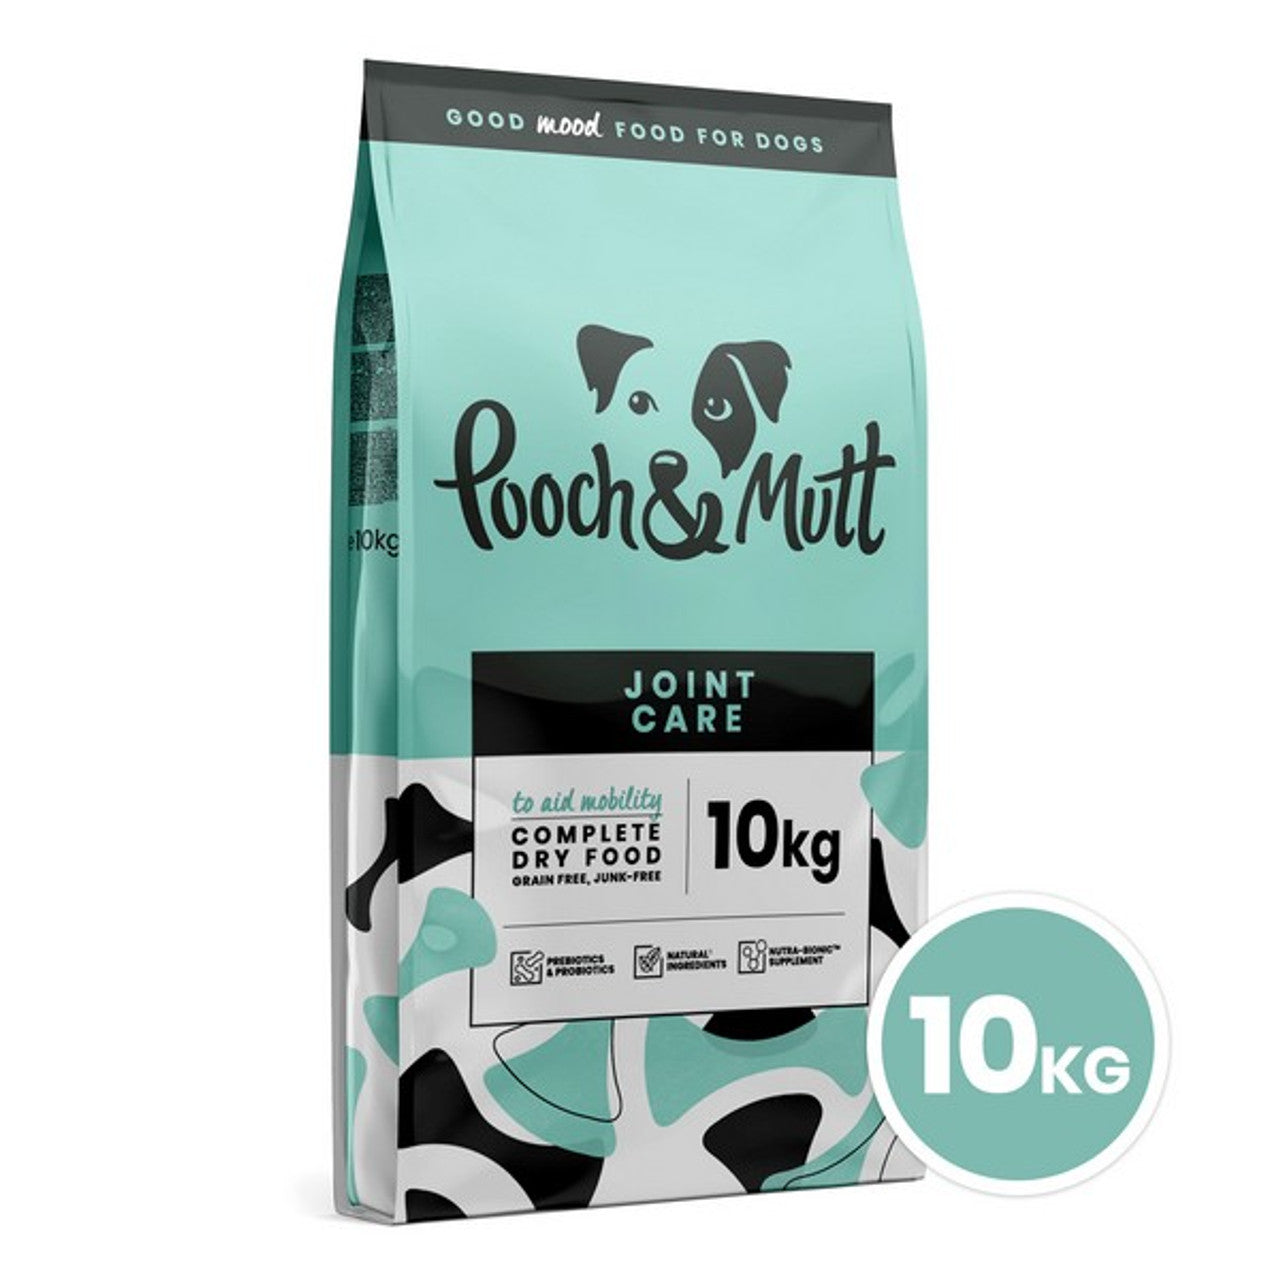 Pooch & Mutt Joint Care Premium Dog Food 10kg